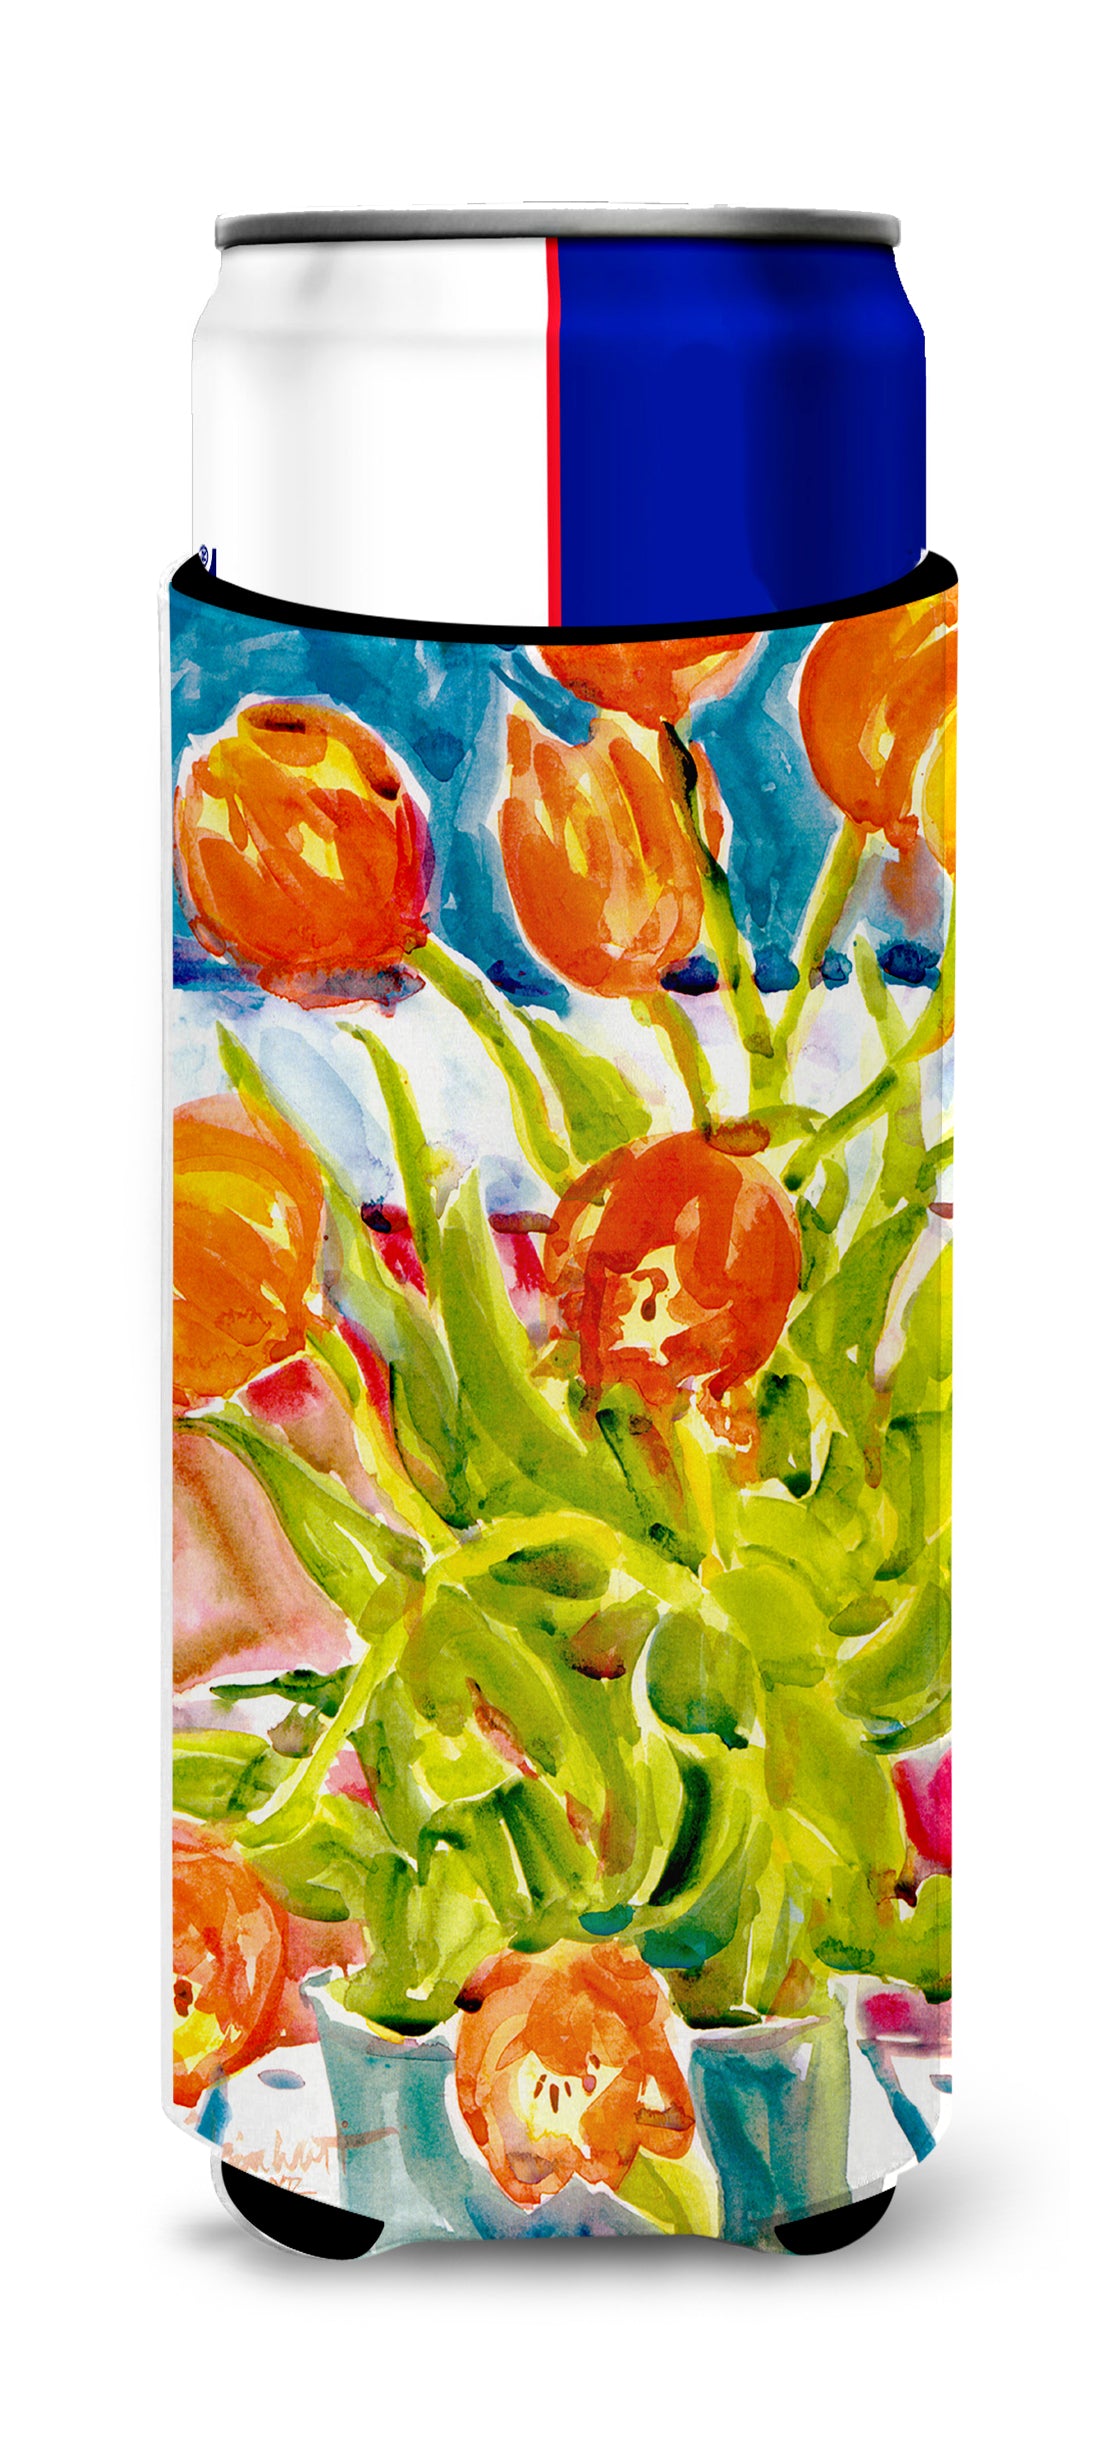 Flowers - Tulips Ultra Beverage Insulators for slim cans 6025MUK.